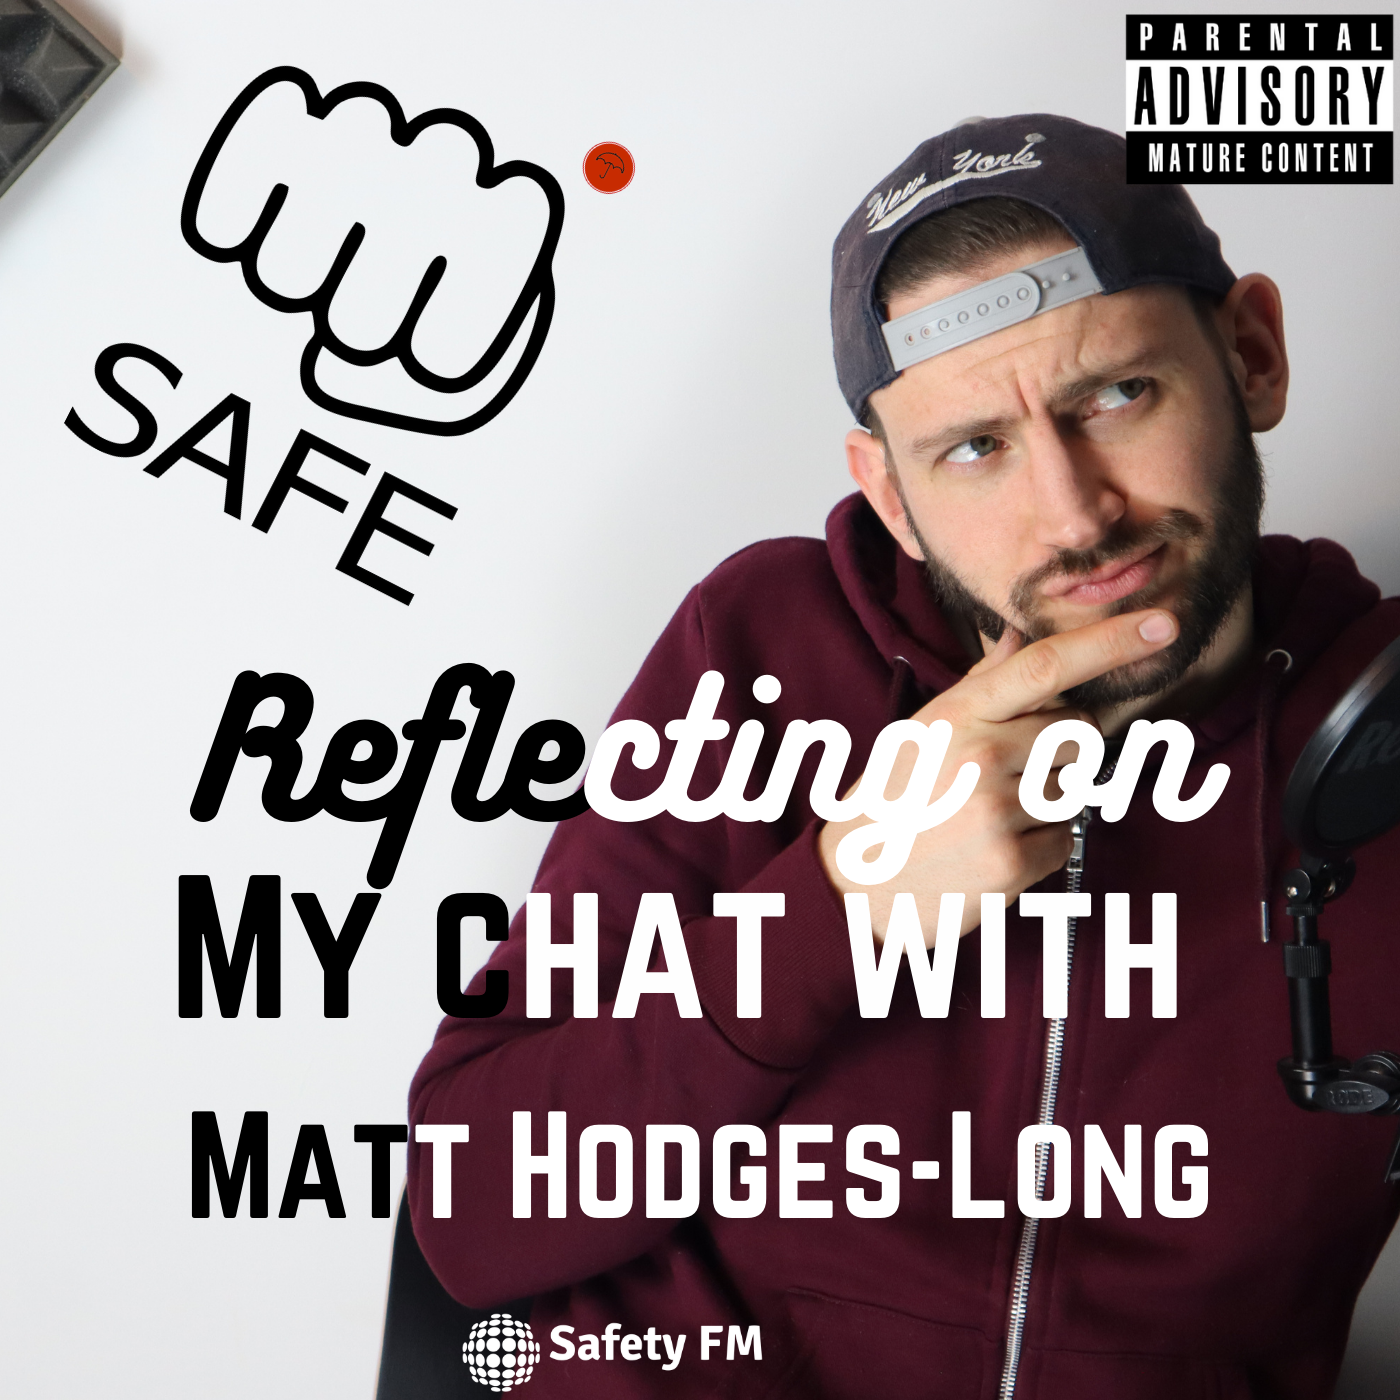 Reflecting on my chat with Matt